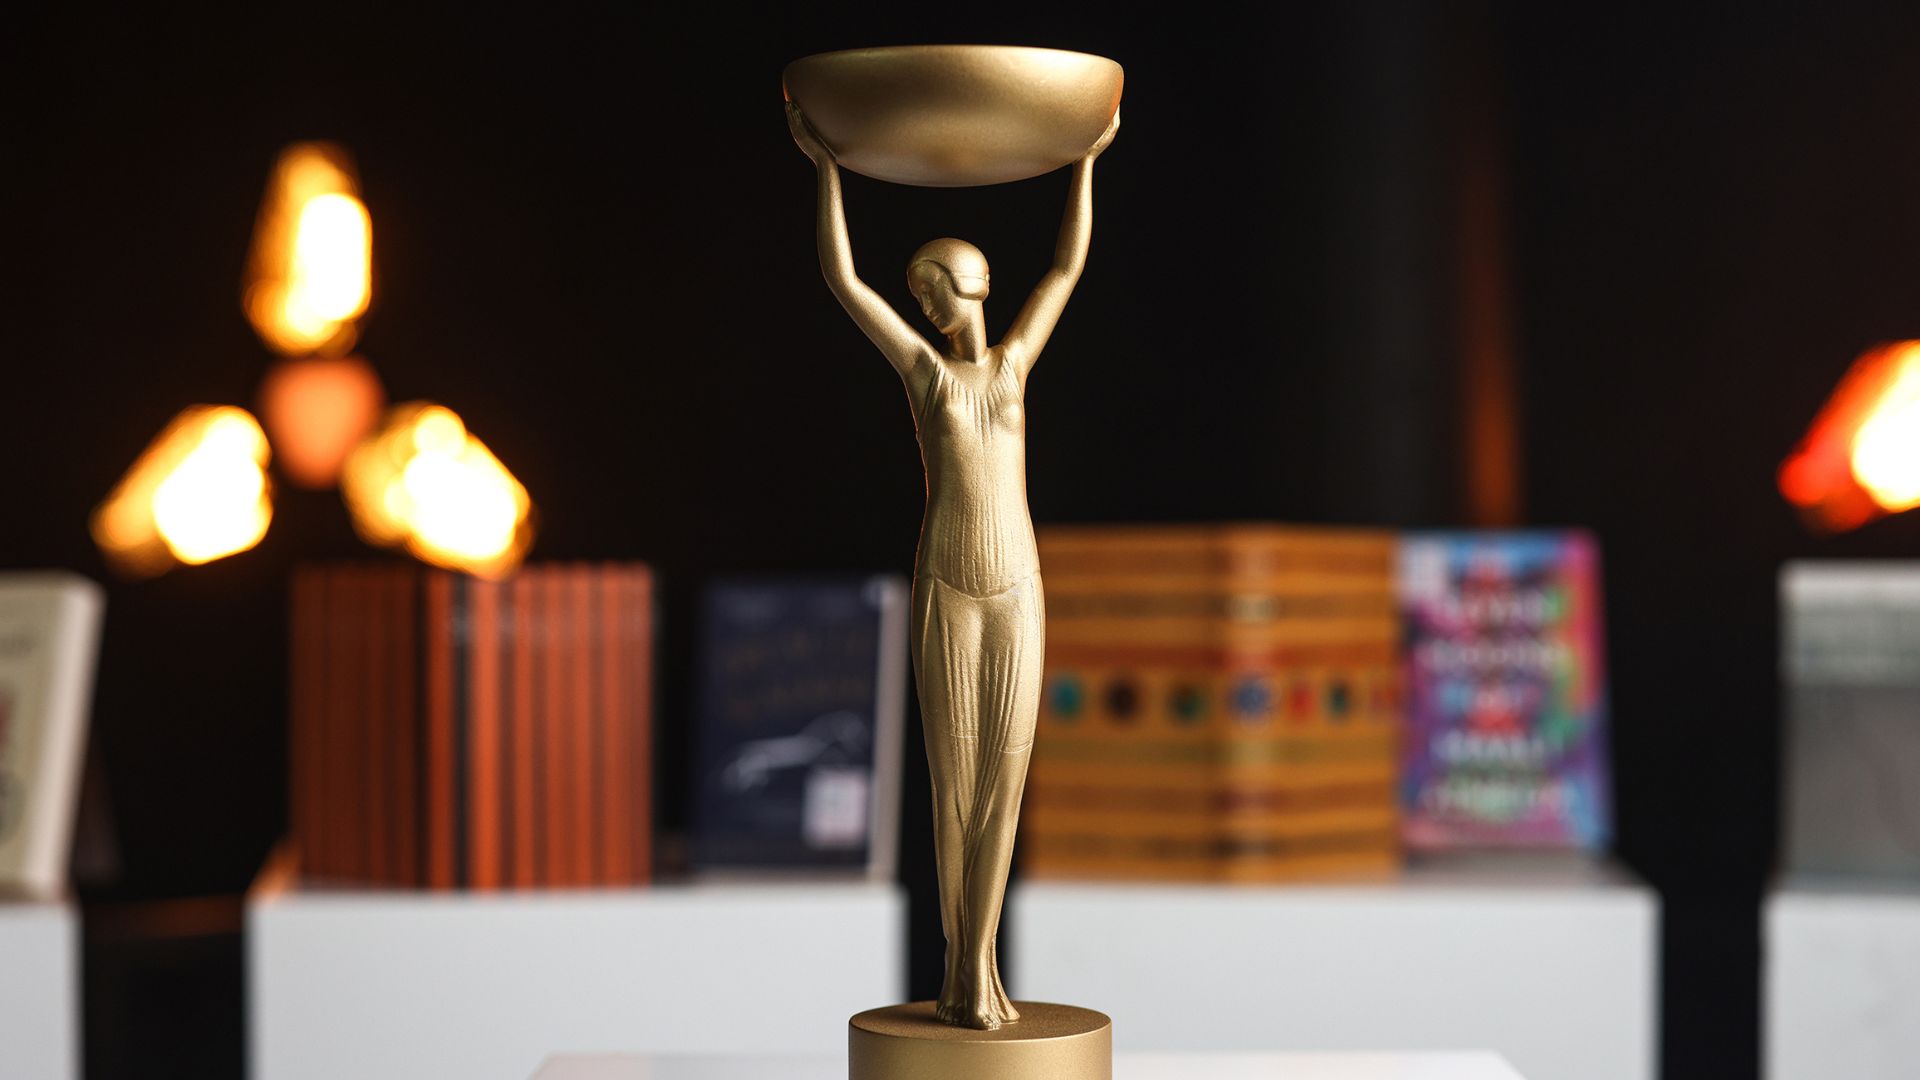 The Booker Prize's newly reinstated trophy